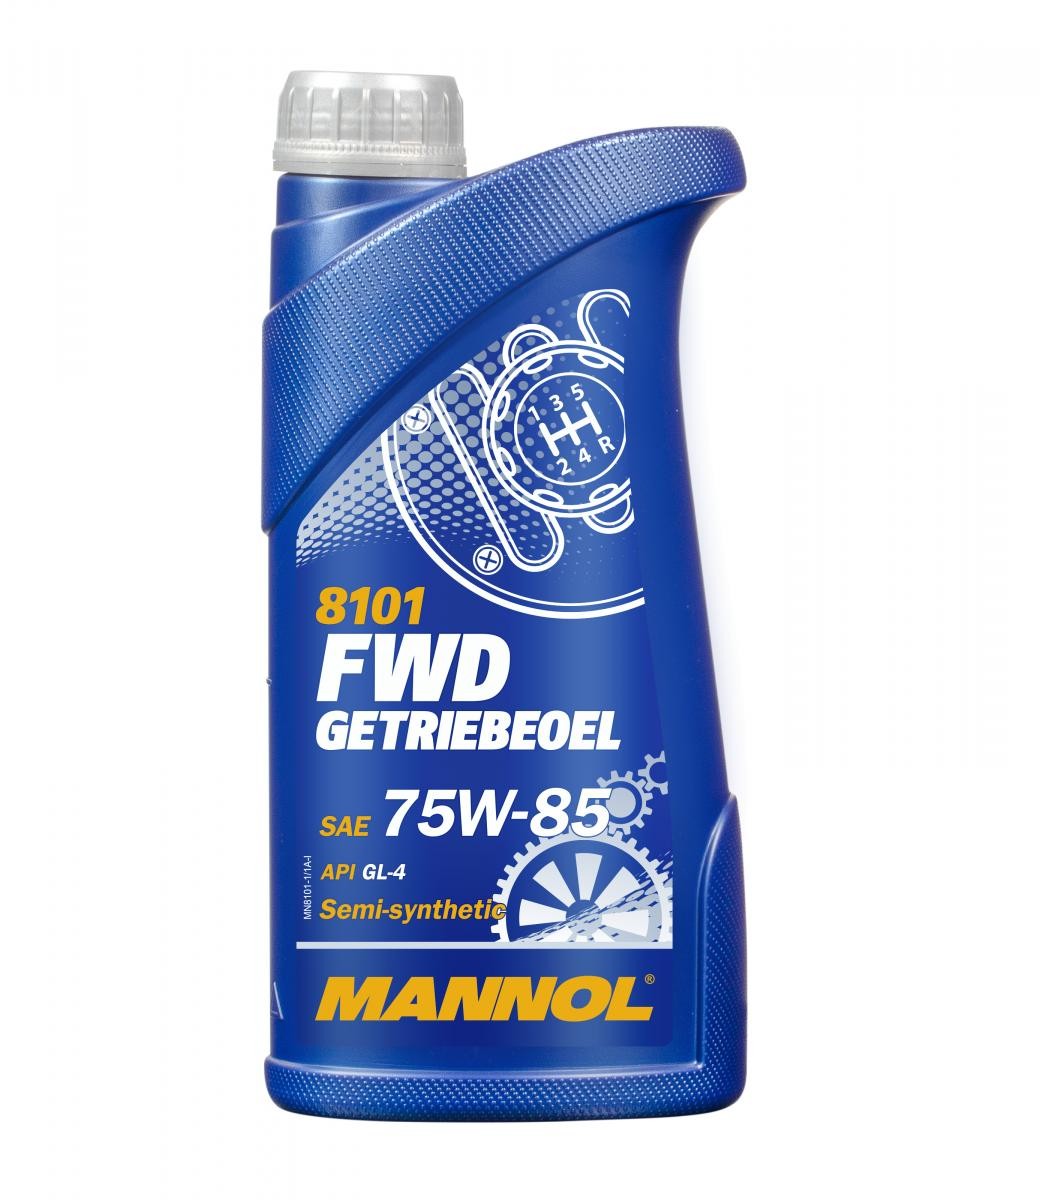 MANNOL FWD MN81011 Gearbox oil and transmission oil Opel Astra J 2.0 CDTI 160 hp Diesel 2015 price